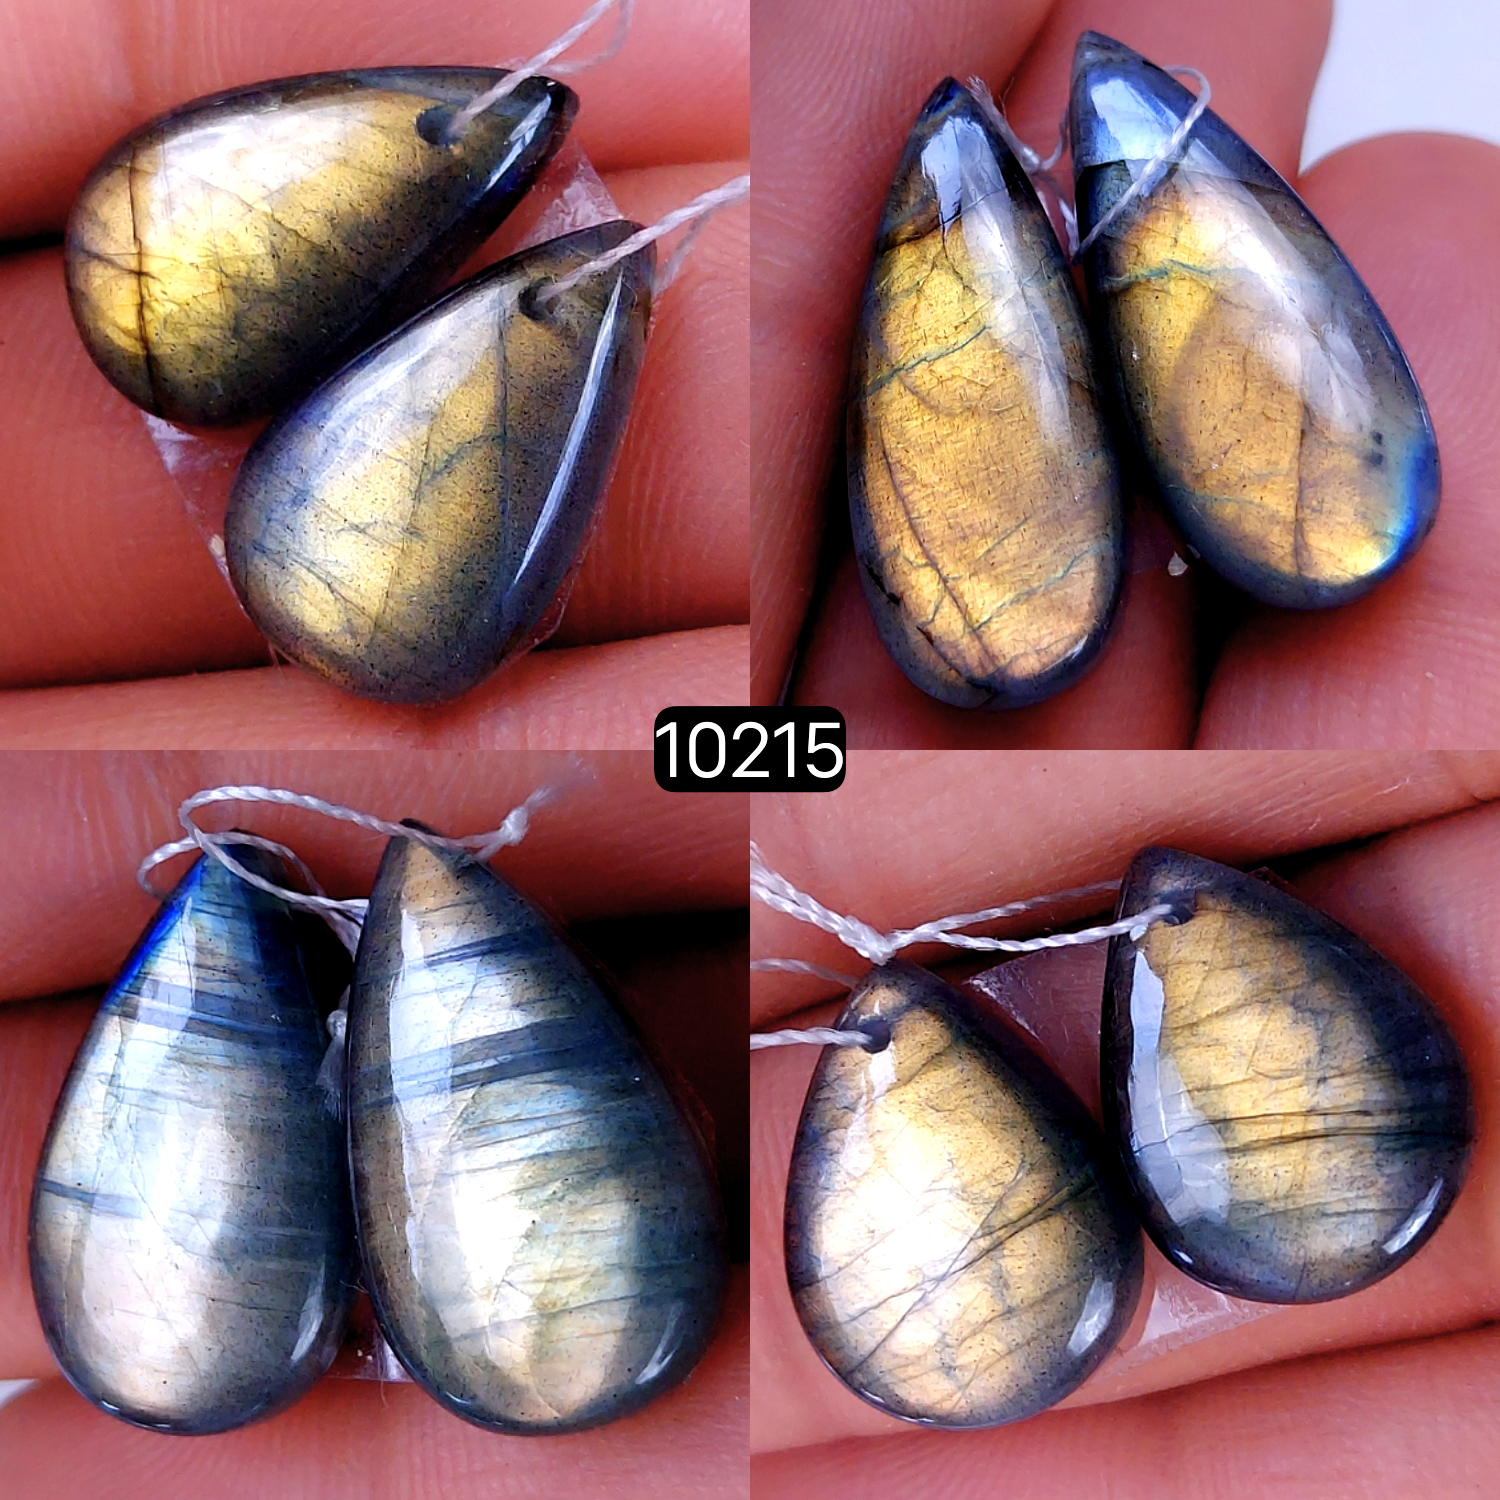 4Pair 89Cts Natural Labradorite Crystal Drill Dangle Drop Earring Pairs Silver Earrings Blue Labradorite Hoop Jewelry  26x12 18x12mm #10215